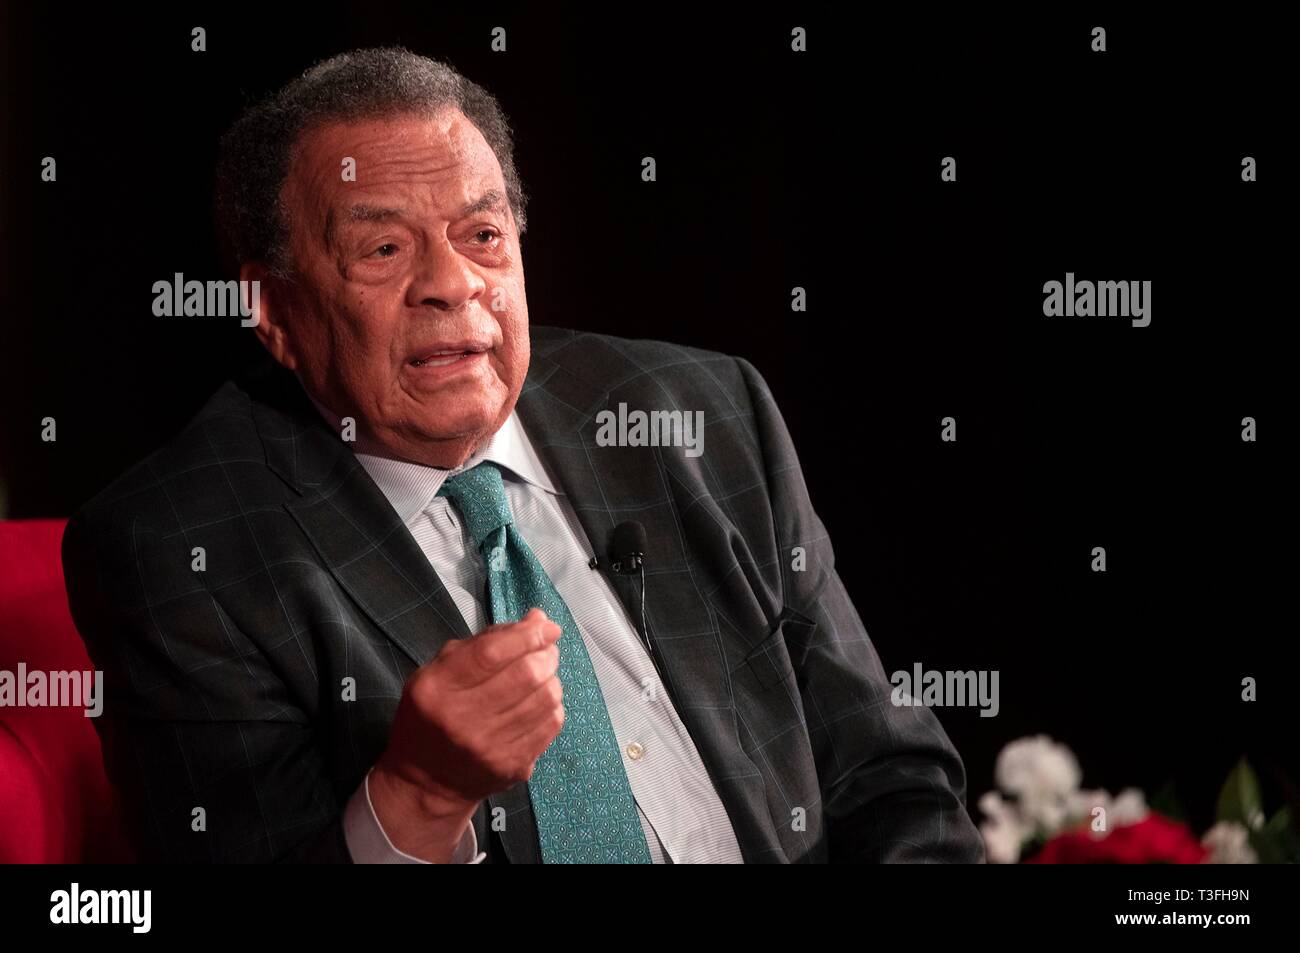 Texas, USA. 08th Apr, 2019. Longtime civil rights leader Amb. Andrew Young discuss social justice efforts during the Summit on Race in America at the LBJ Presidential Library April 8, 2019 in Austin, Texas. Young, a key lieutenant to Martin Luther King, Jr. in the civil rights movement of the 1960s, has served as mayor of Atlanta, U.S. congressman from Georgia, and U.S. Ambassador to the United Nations. Credit: Planetpix/Alamy Live News Stock Photo